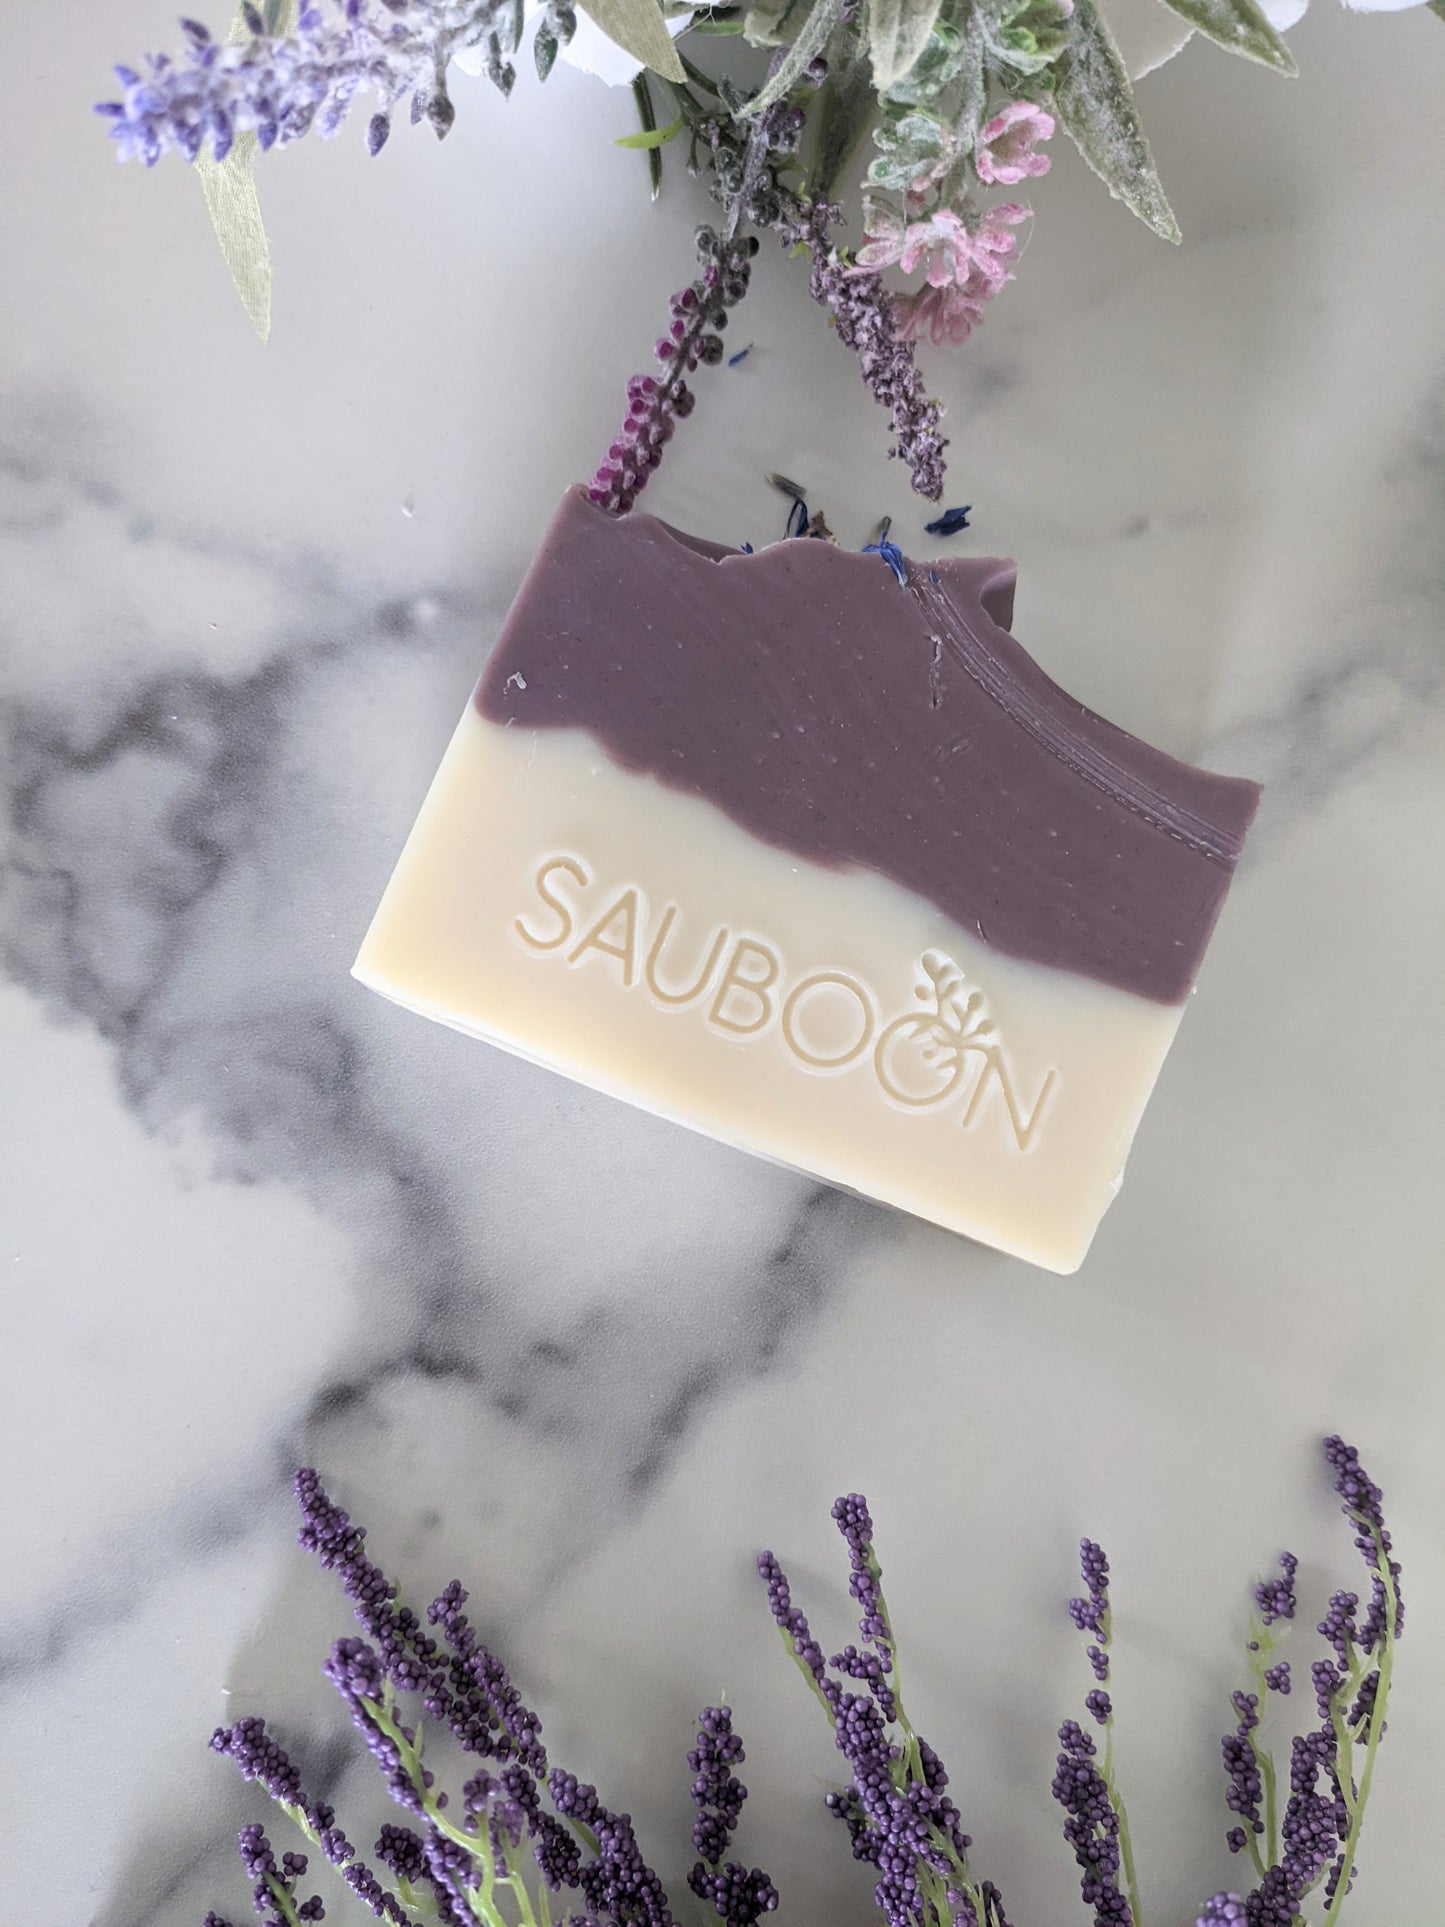 Lavender vegan handcrafted soaps. Our handcrafted luxurious soaps are made locally here in San Diego in small batches.  Highest quality ingredients used to give the best lather, nourishment, and cleansing experience.  We use different type of clays in each soap including rhasoul clay, kaolin clay, rose clay, red Moroccan clay, French green clay which add to the beautiful washing experience using our soaps. Great for gifting for birthdays, celebrations, bridal showers or self care gift to yourself!